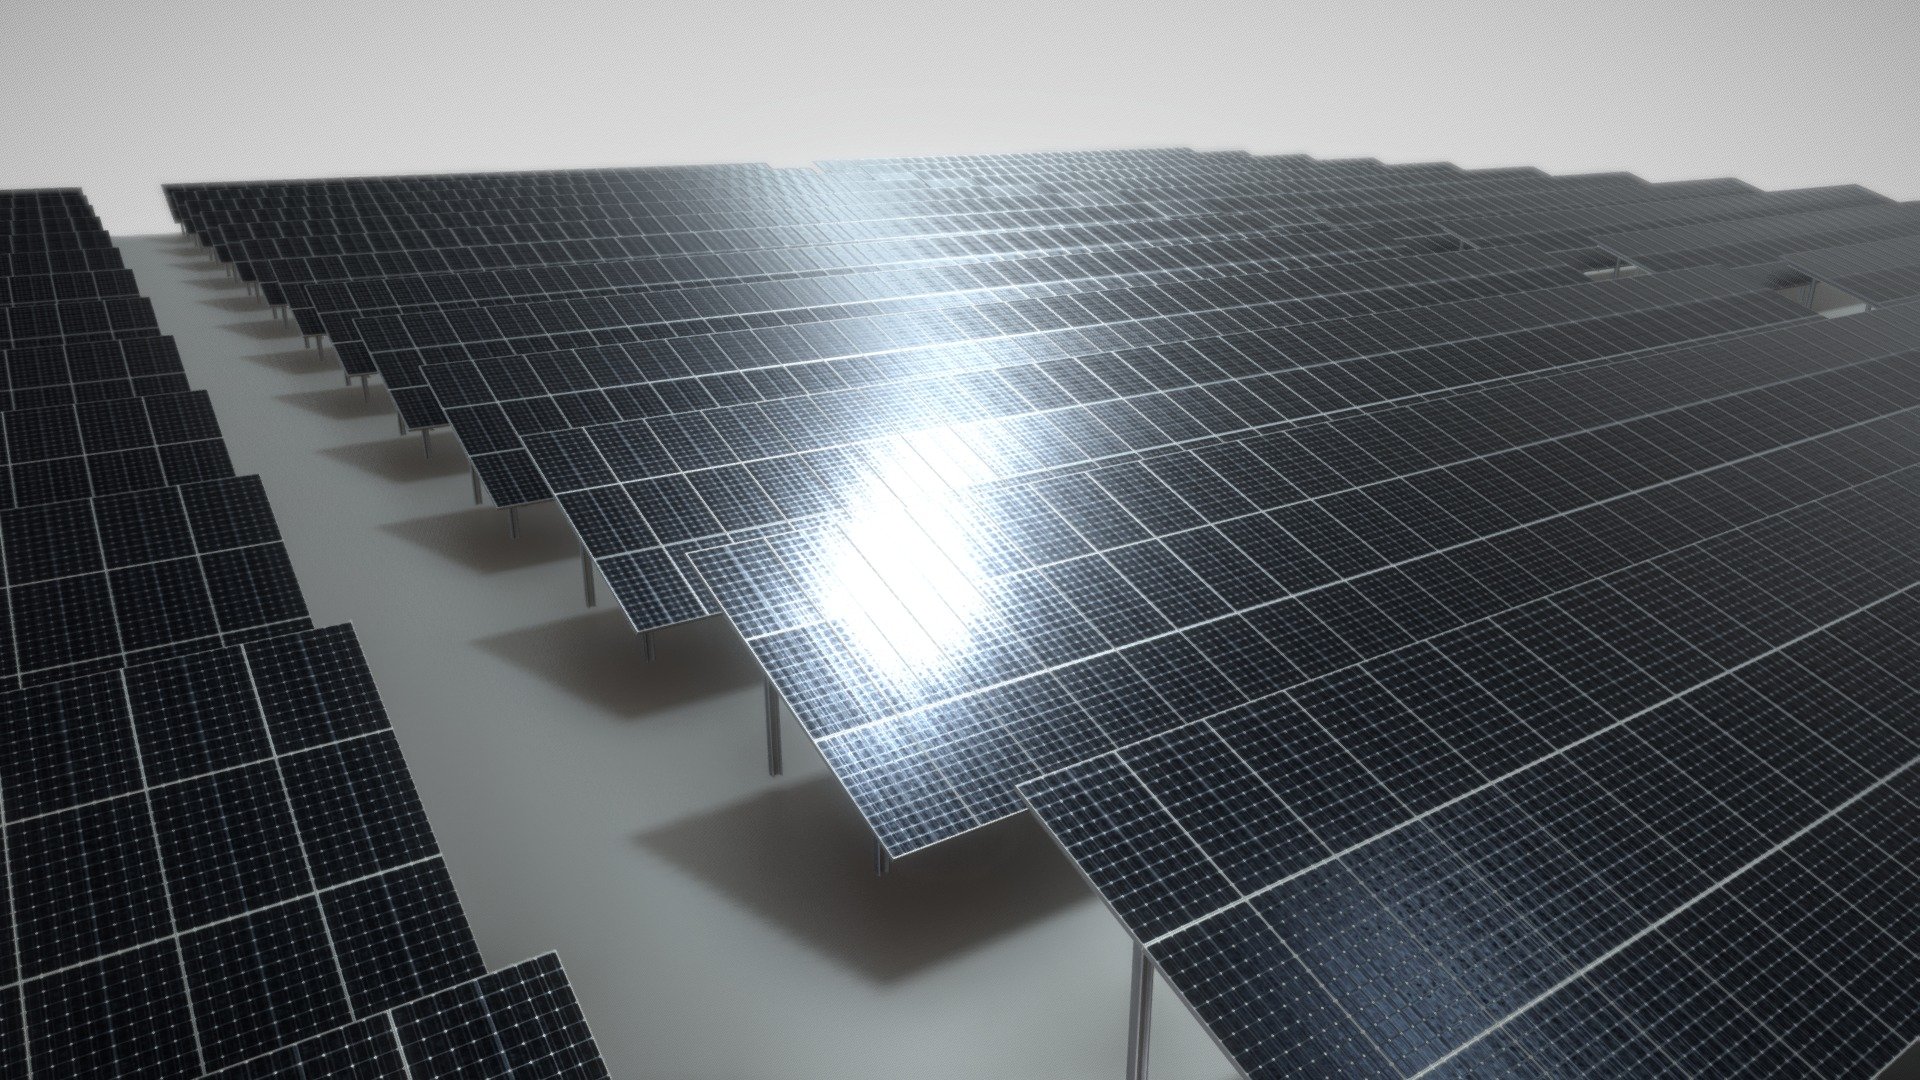 Solarmodule Version [5] 36m.




Object Name - Solarmodule_Version_5_35m 

Object Dimensions -  35.200m x 4.487m x 2.601m






Vertices = 6672

Edges = 14886

Polygons = 8468






Object rotation and location is 0, scale is 1.000 x 1.000 x 1.000

Object center point is where it should be, so you can place the object easily on your ground

Texture map types: Base Color, Normal, Metalness, Roughness



3D model formats: 




Native format (*.blend)

Autodesk FBX (.fbx)

OBJ (.obj, .mtl)

glTF (.gltf, .glb)

X3D (.x3d)

Collada (.dae)

Stereolithography (.stl)

Polygon File Format (.ply)

Alembic (.abc)

DXF (.dxf)

USDC



Last update:
12:22:37  03.02.22






3d modeled and pbr-textured by 3DHaupt in Blender-3D.
 - Solarmodule Version [5] 36m - Buy Royalty Free 3D model by VIS-All-3D (@VIS-All) 3d model